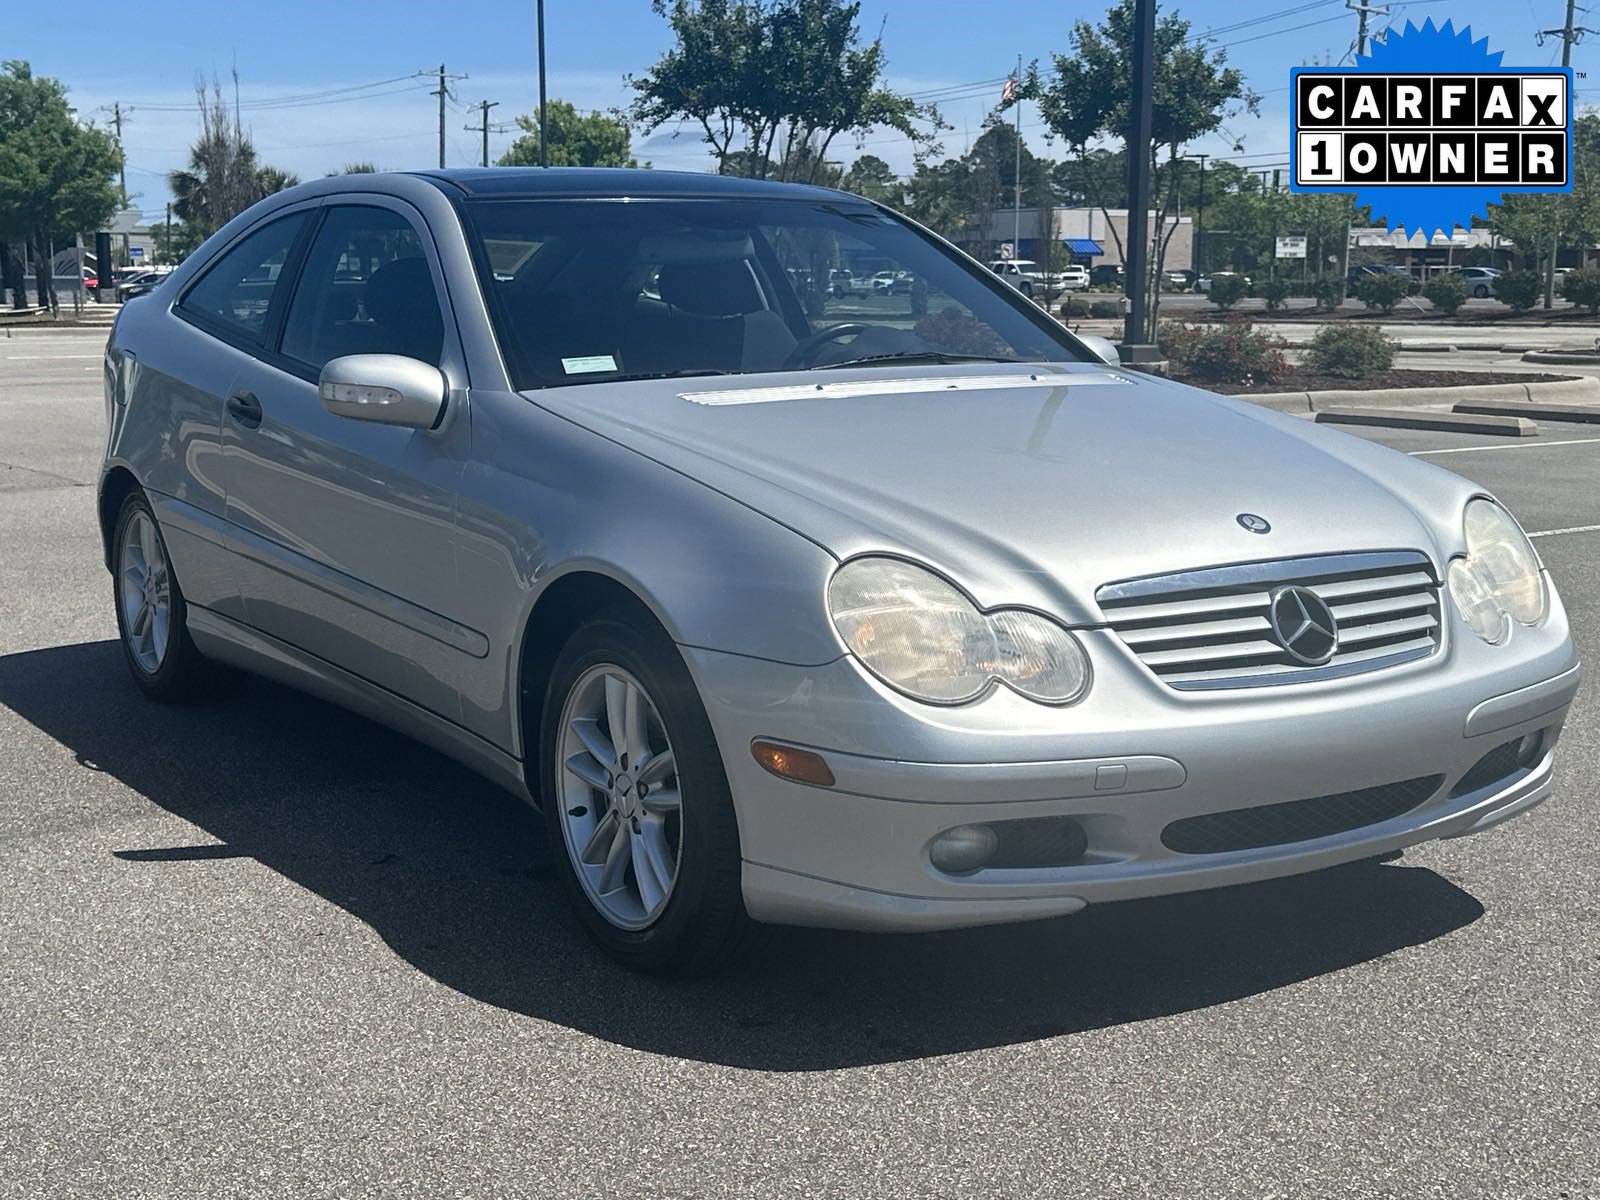 Pre-Owned 2002 Mercedes-Benz C-Class 2dr Cpe 2.3L Coupe in Merriam #P21643  | Hendrick Chevrolet Shawnee Mission